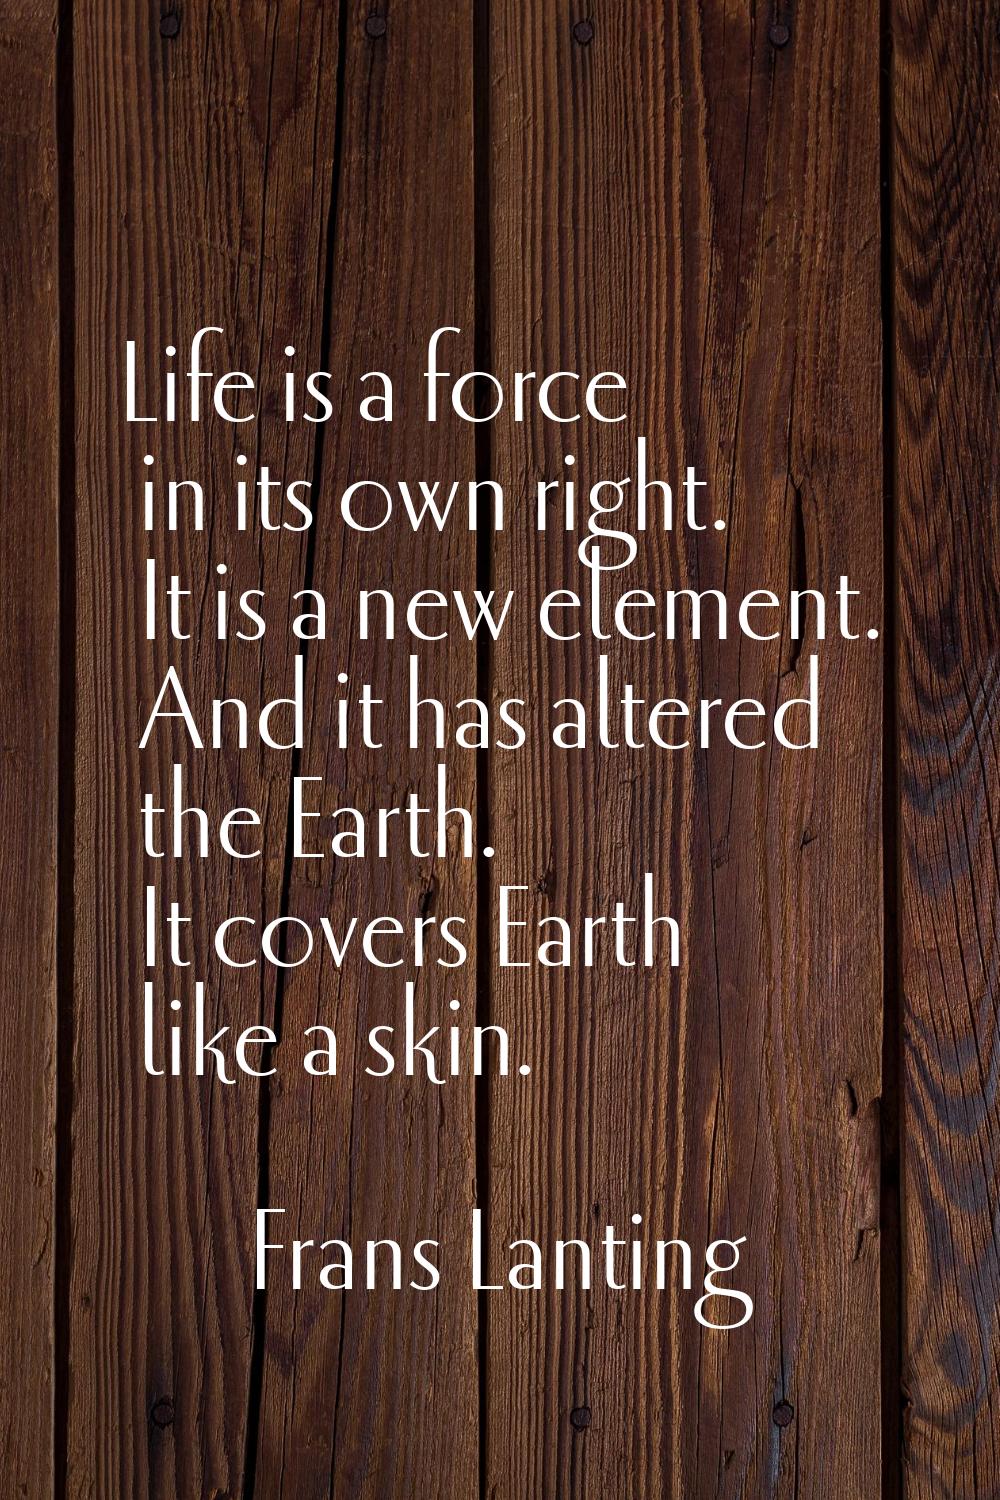 Life is a force in its own right. It is a new element. And it has altered the Earth. It covers Eart